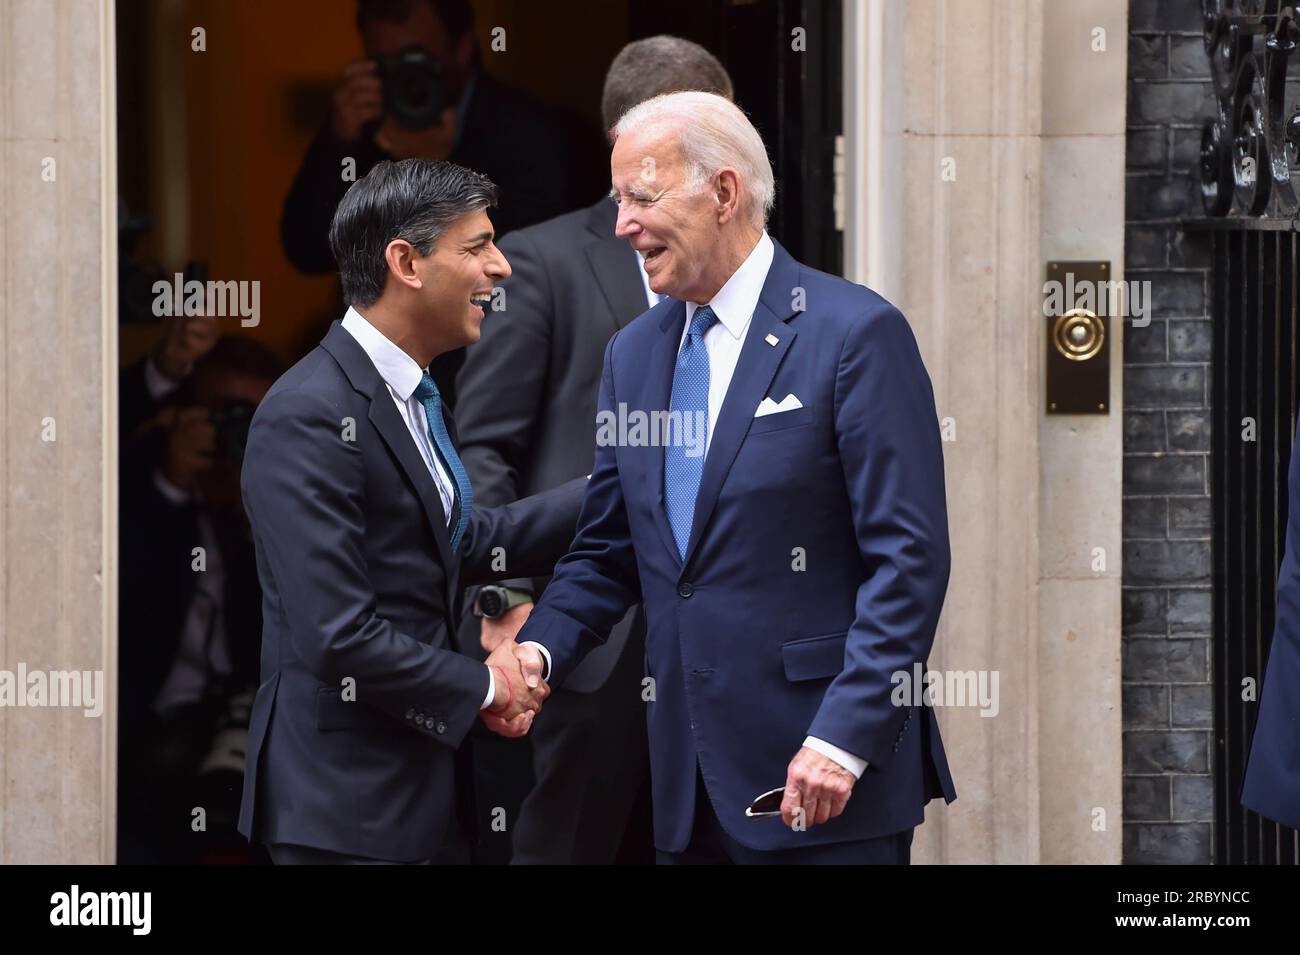 US President JOE BIDEN leaves 10 Downing Street after talks with Rishi Sunak before heading to Lithuania for a NATO summit focused on the conflict in Ukraine. Stock Photo